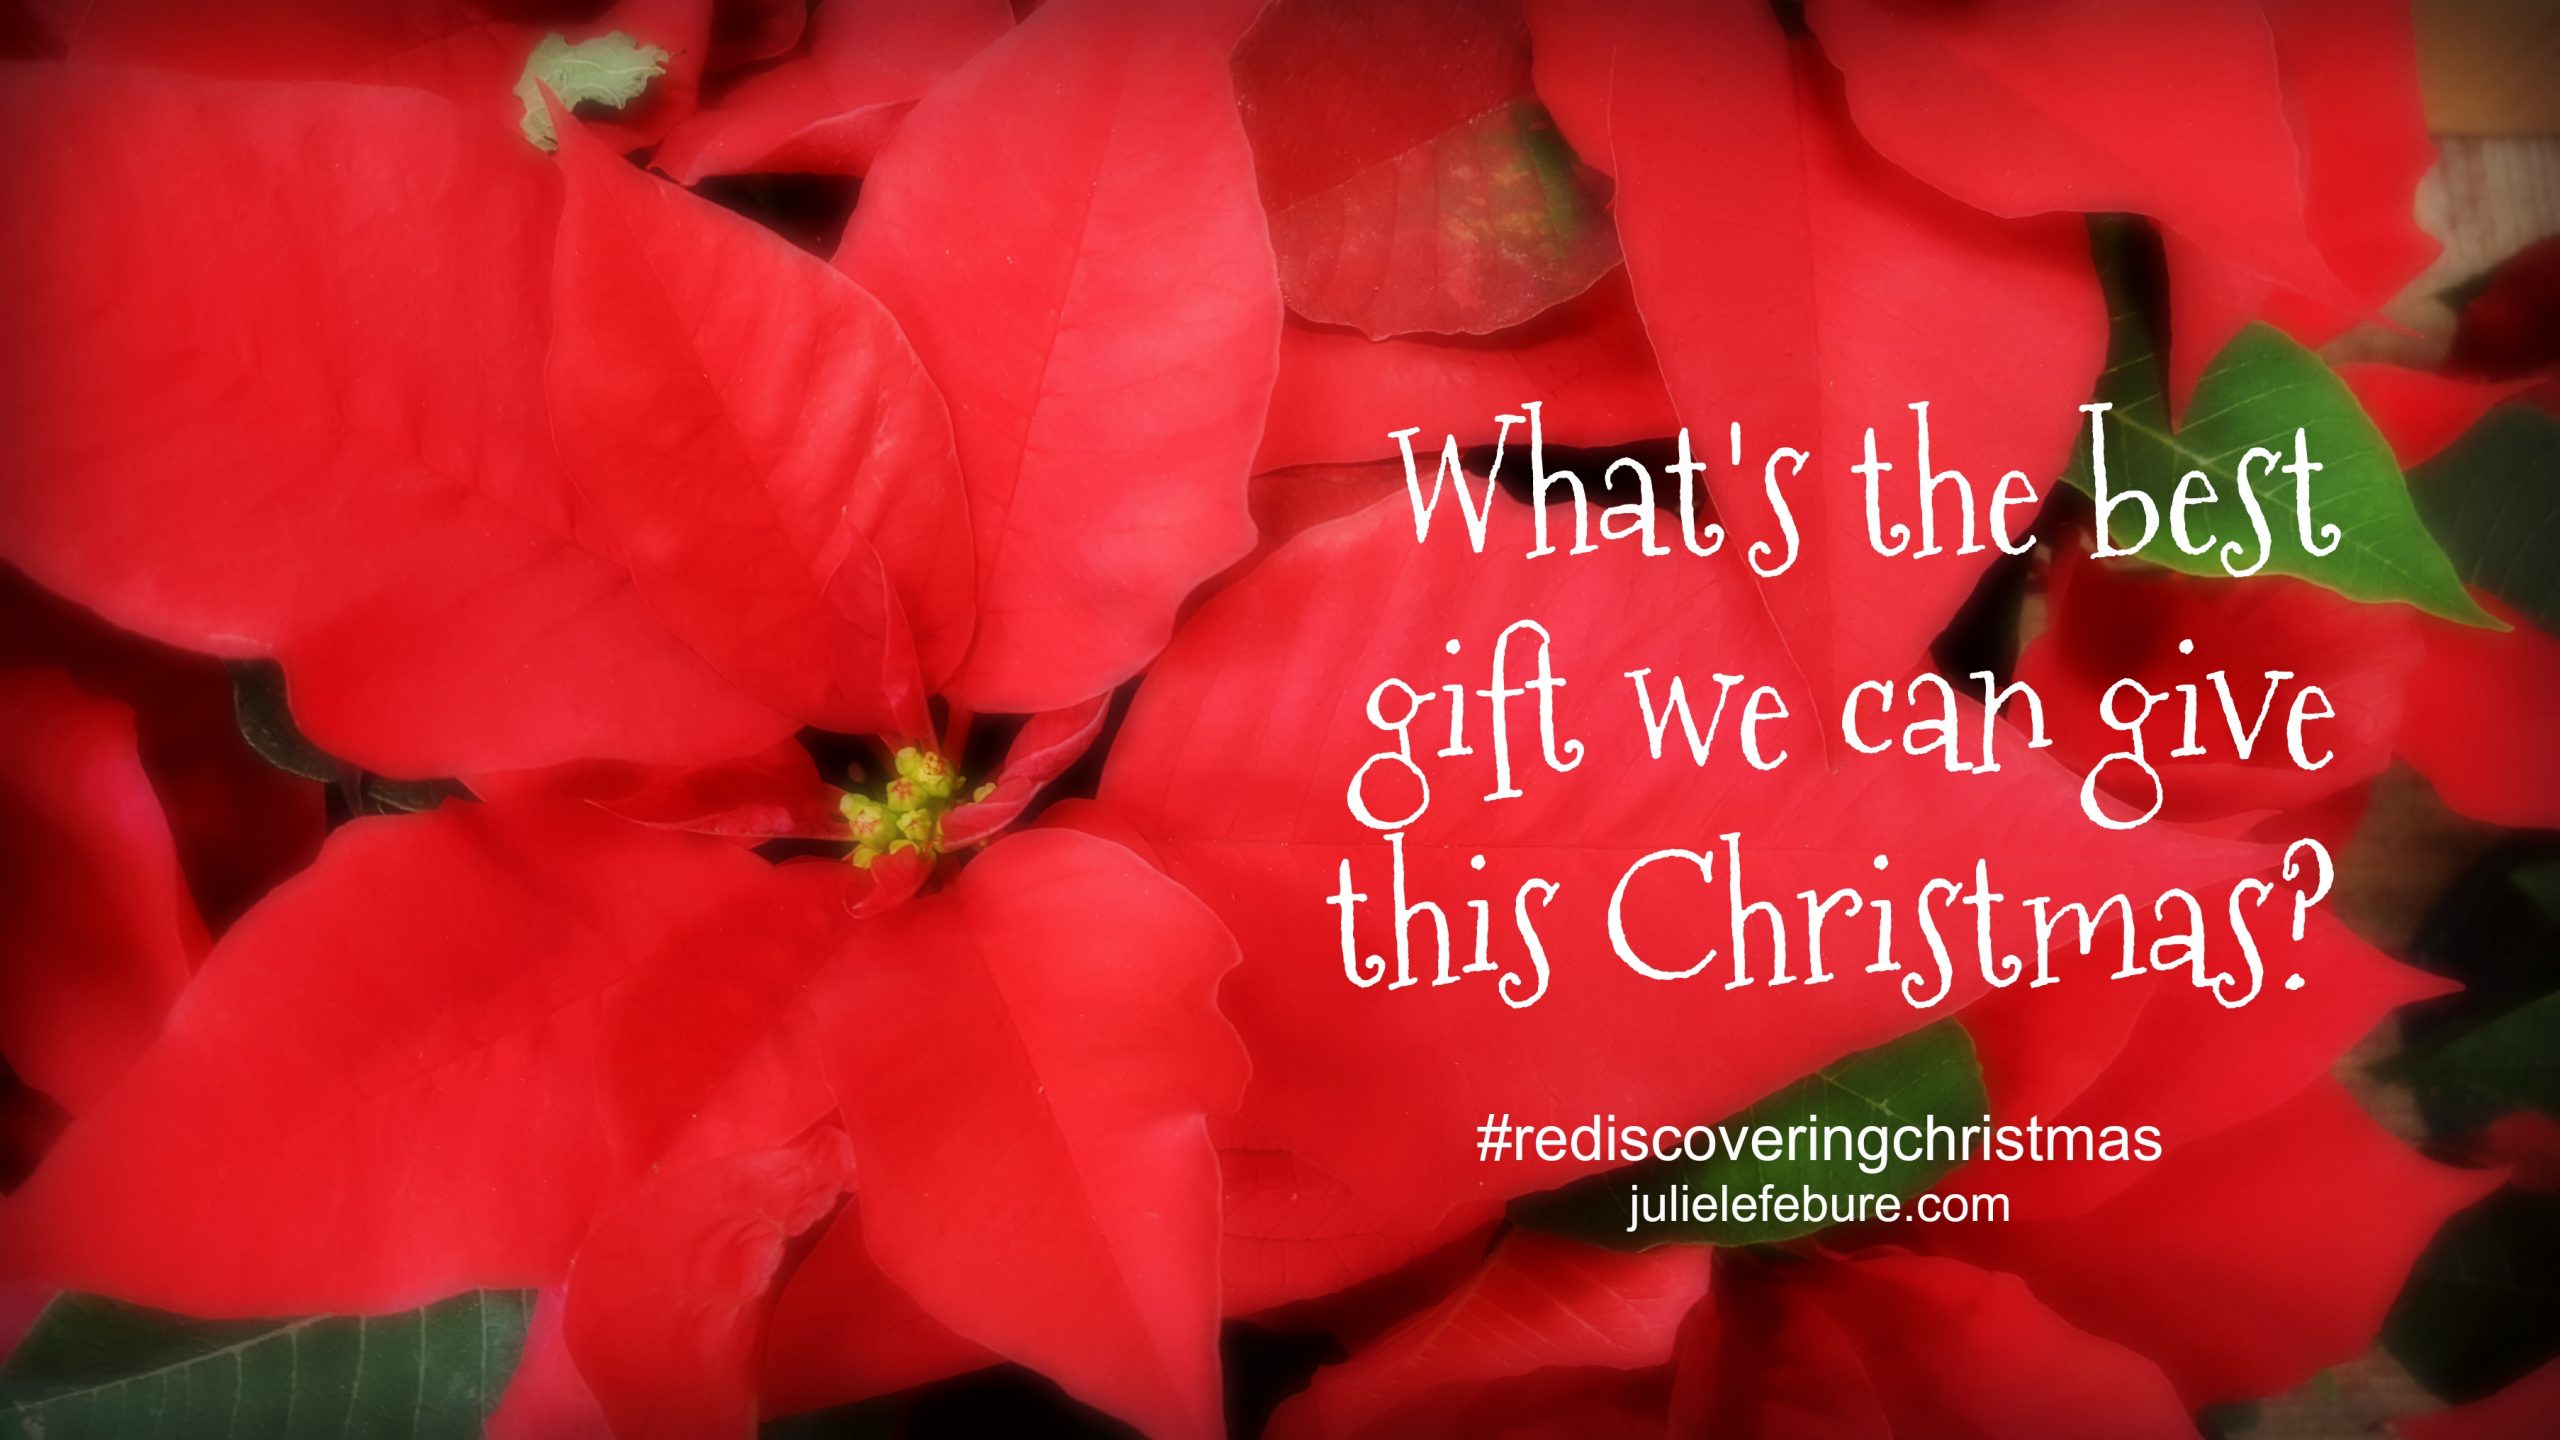 Rediscovering Christmas – The Best Gift We Can Give